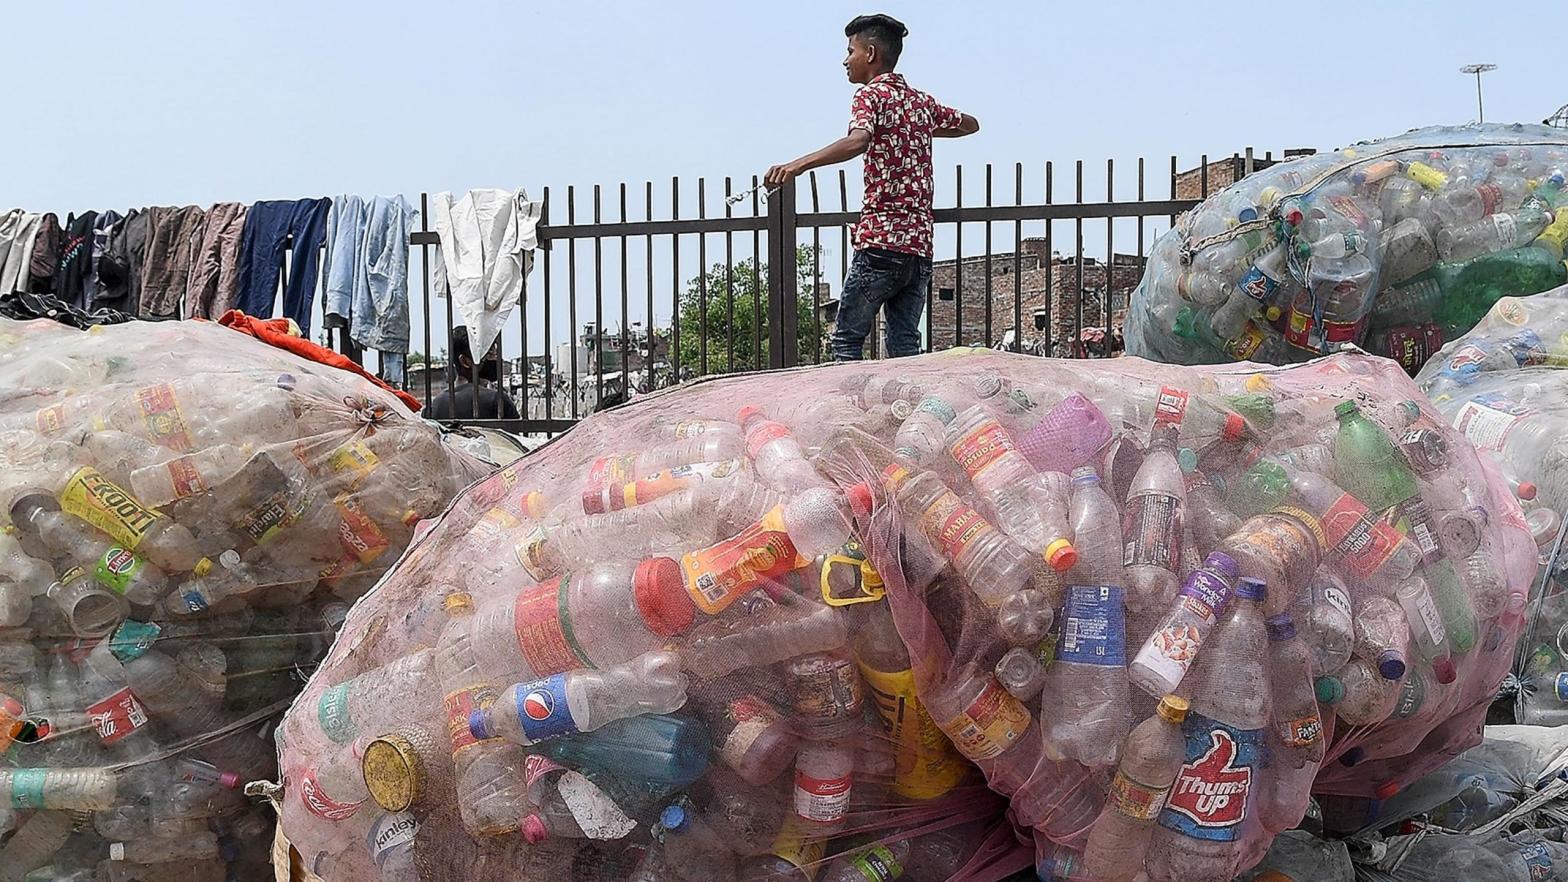 This could all be turned into useful chemicals. (Photo: Prakash Singh, Getty Images)